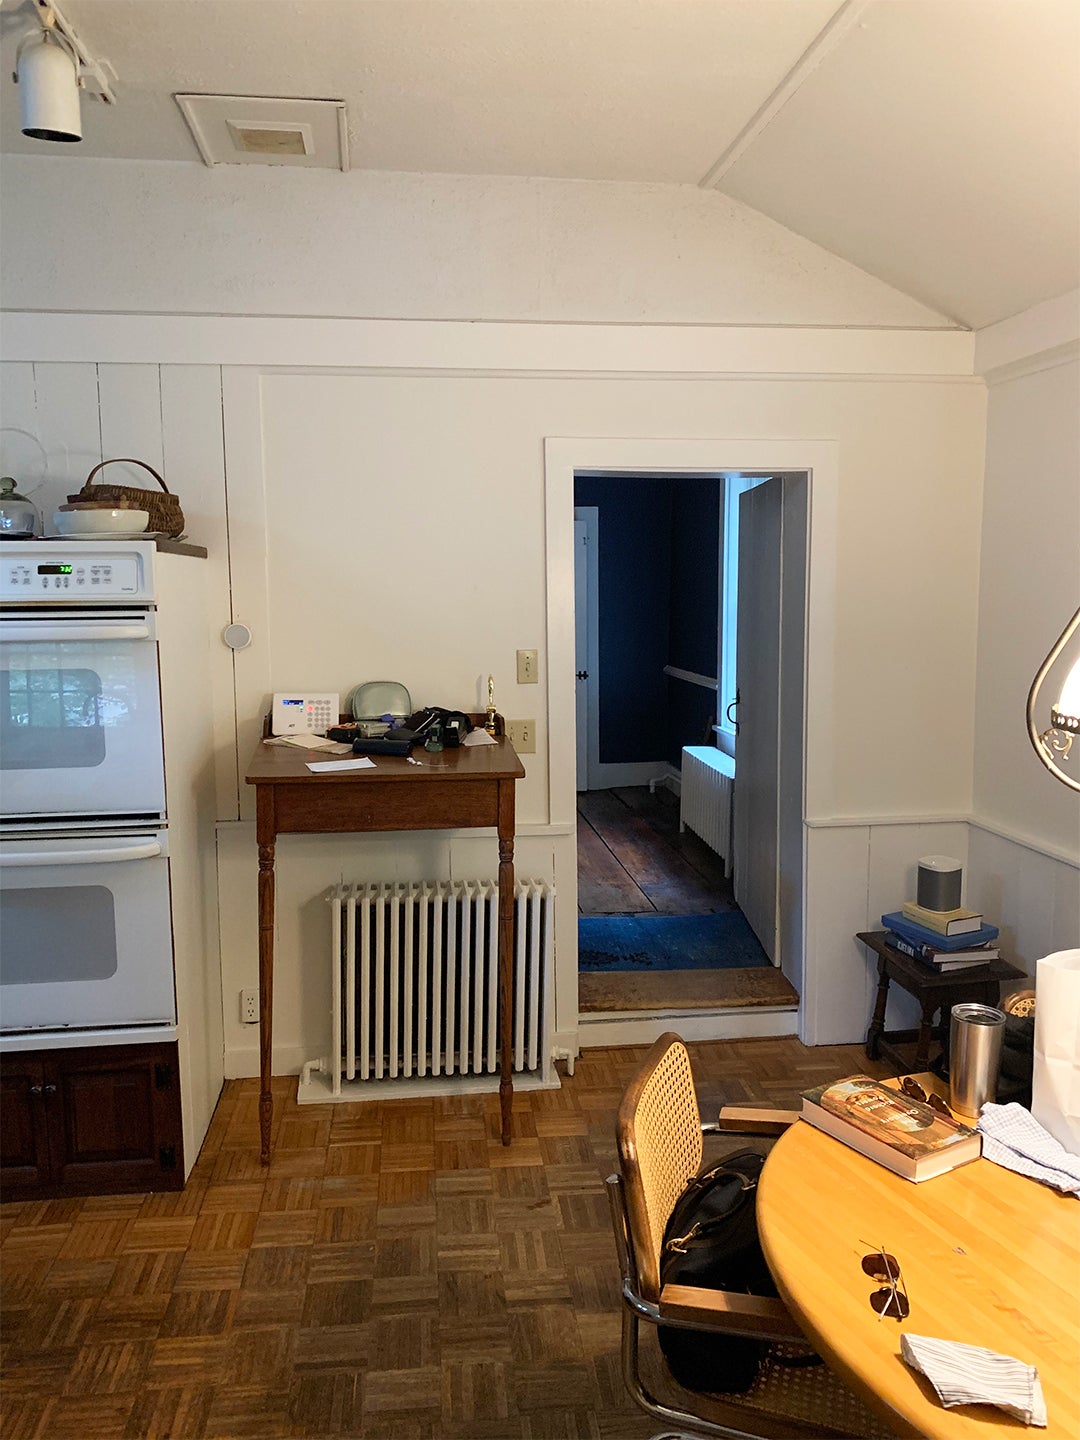 How One Designer Tackled the 1800s (and Then the 1980s) in This Kitchen Reno